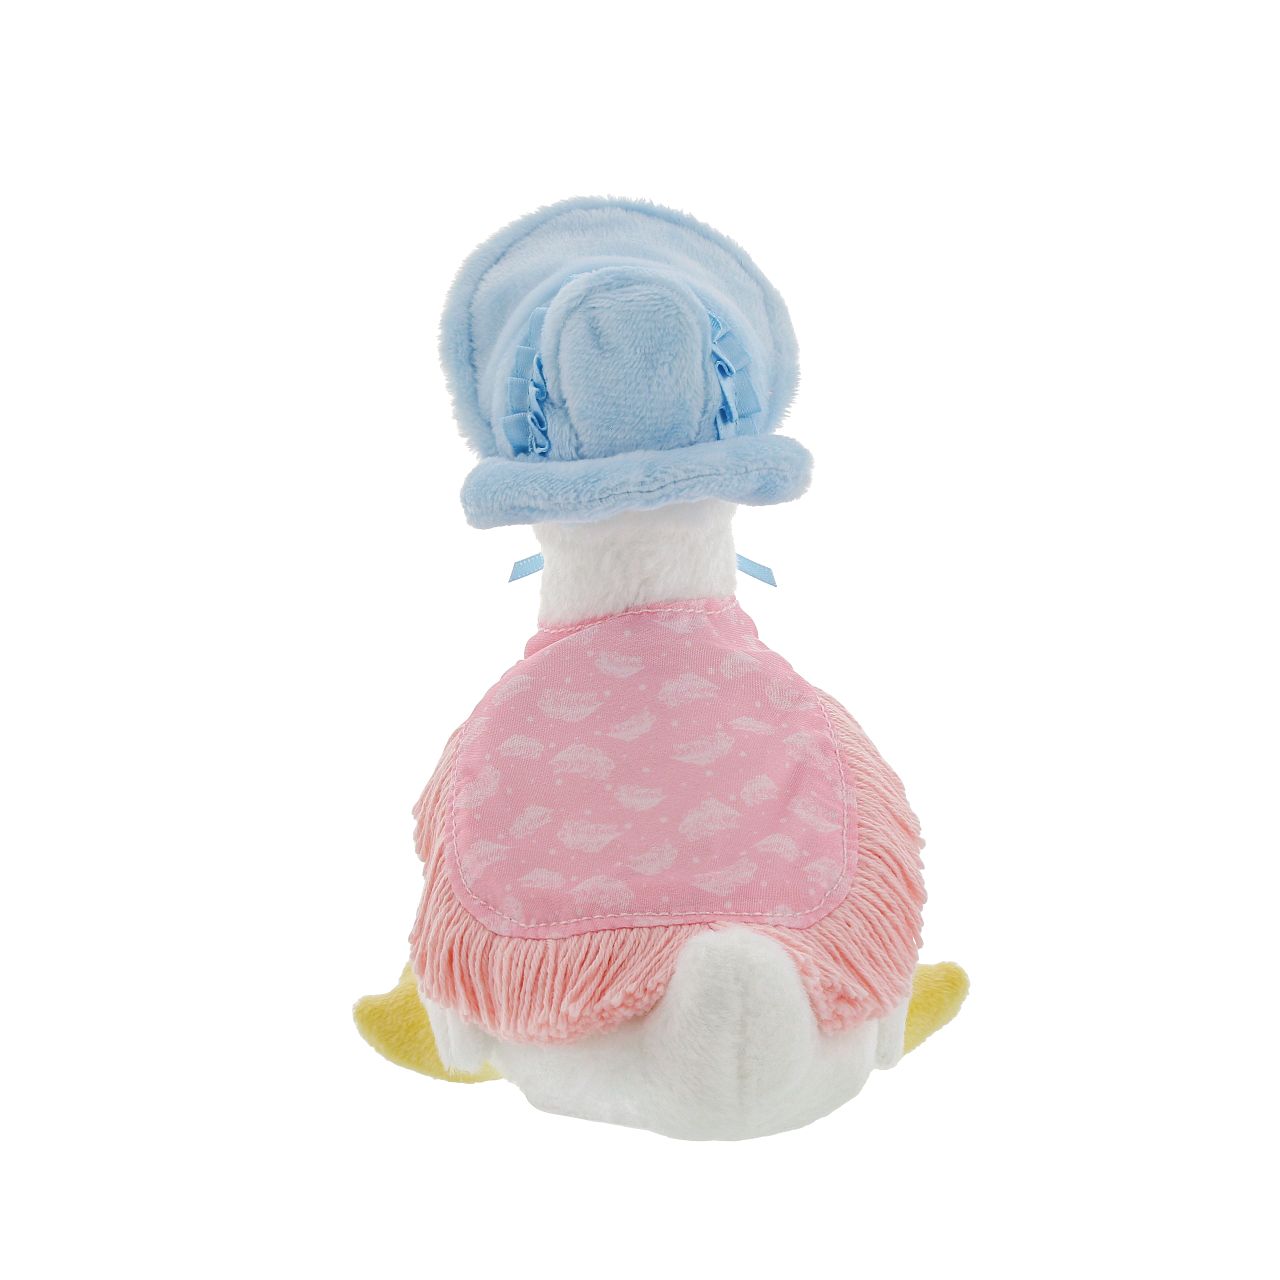 Jemima Puddle-Duck Small Peter Rabbit Collection  This Jemima Puddle-Duck soft toy is made from beautifully soft fabric and is dressed in clothing exactly as illustrated by Beatrix Potter. With her signature beautiful bonnet and shawl.